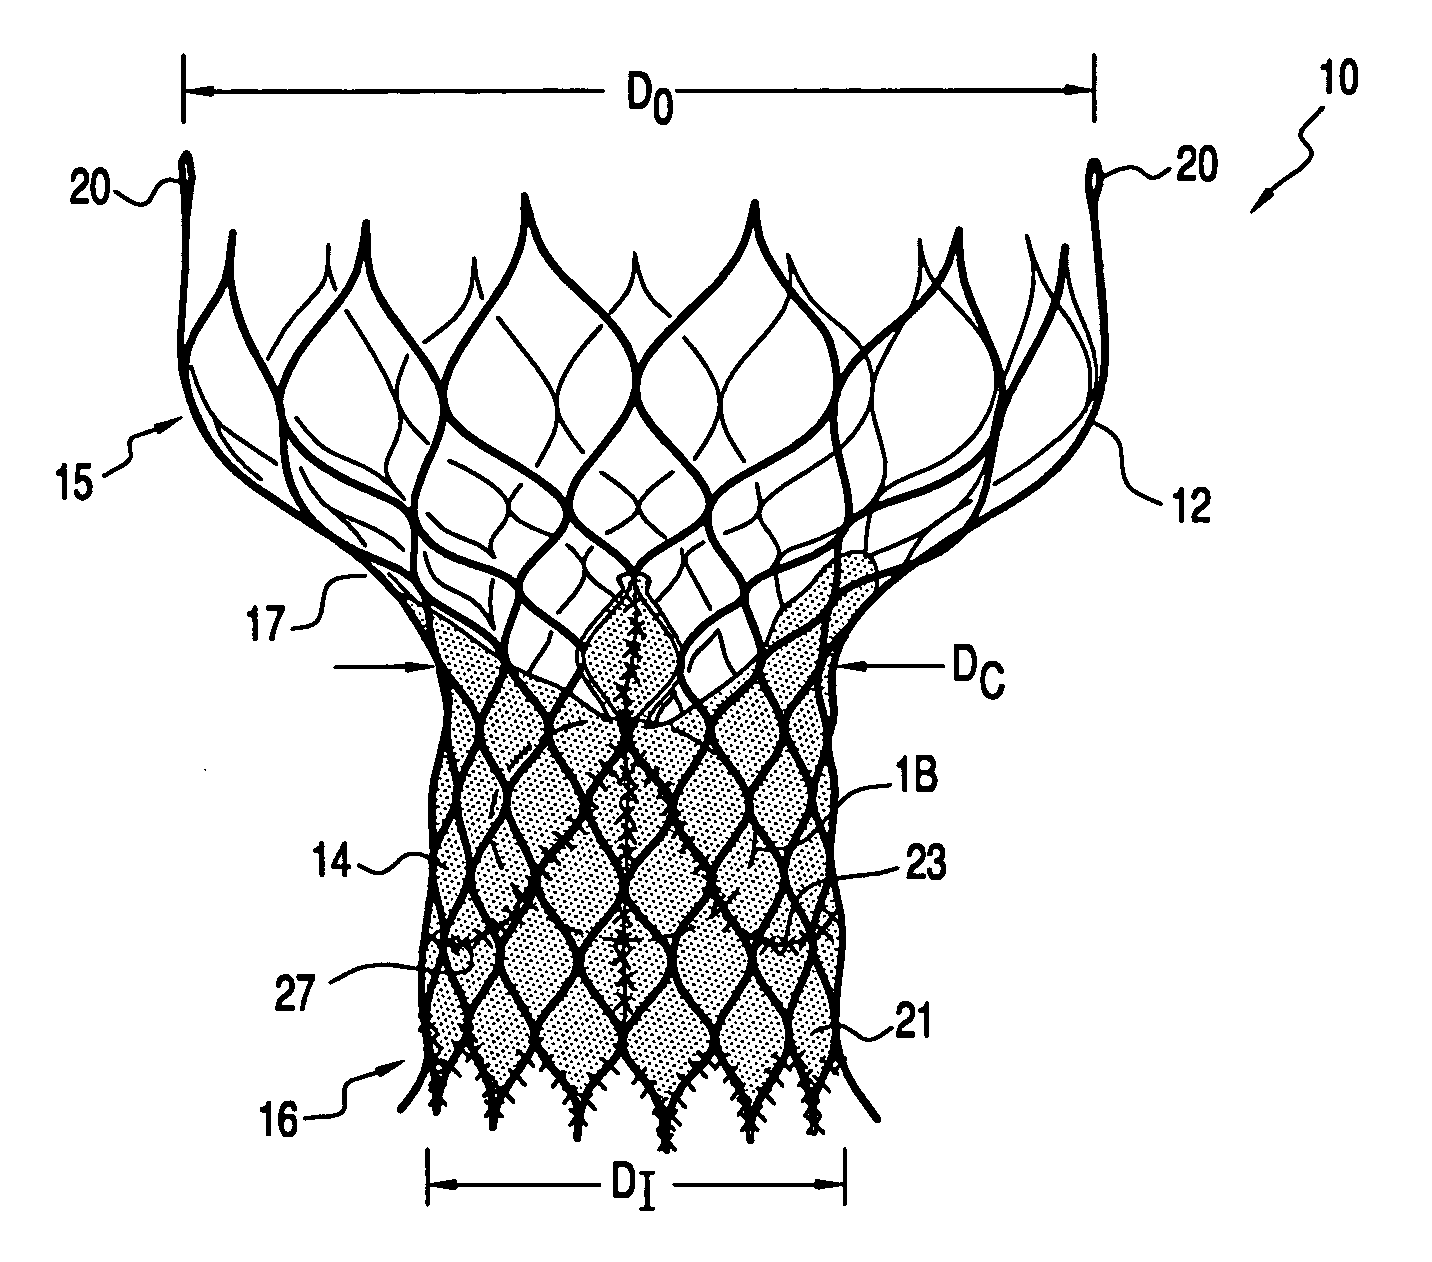 Heart valve prosthesis and methods of manufacture and use